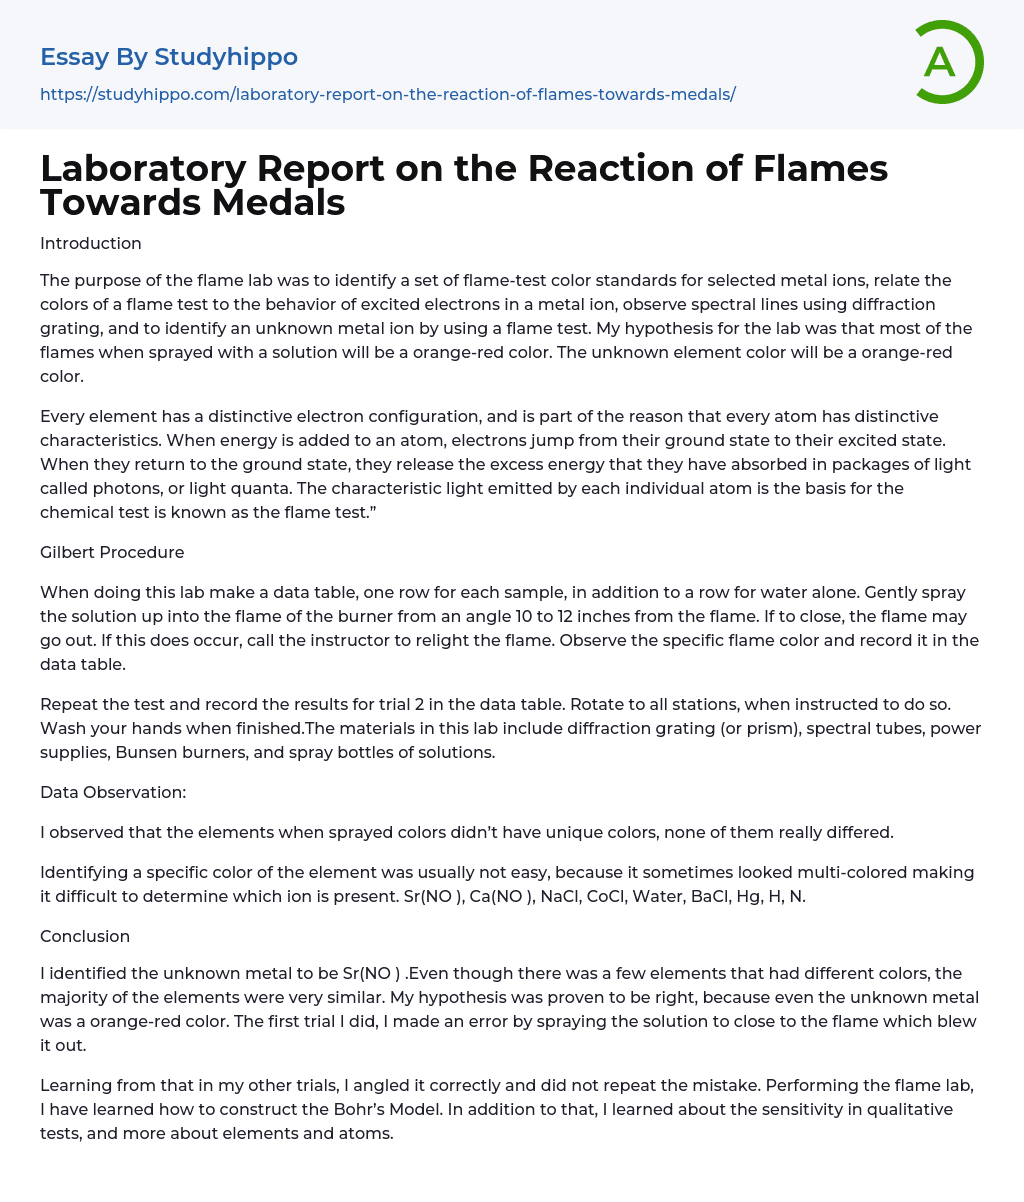 Laboratory Report on the Reaction of Flames Towards Medals Essay Example